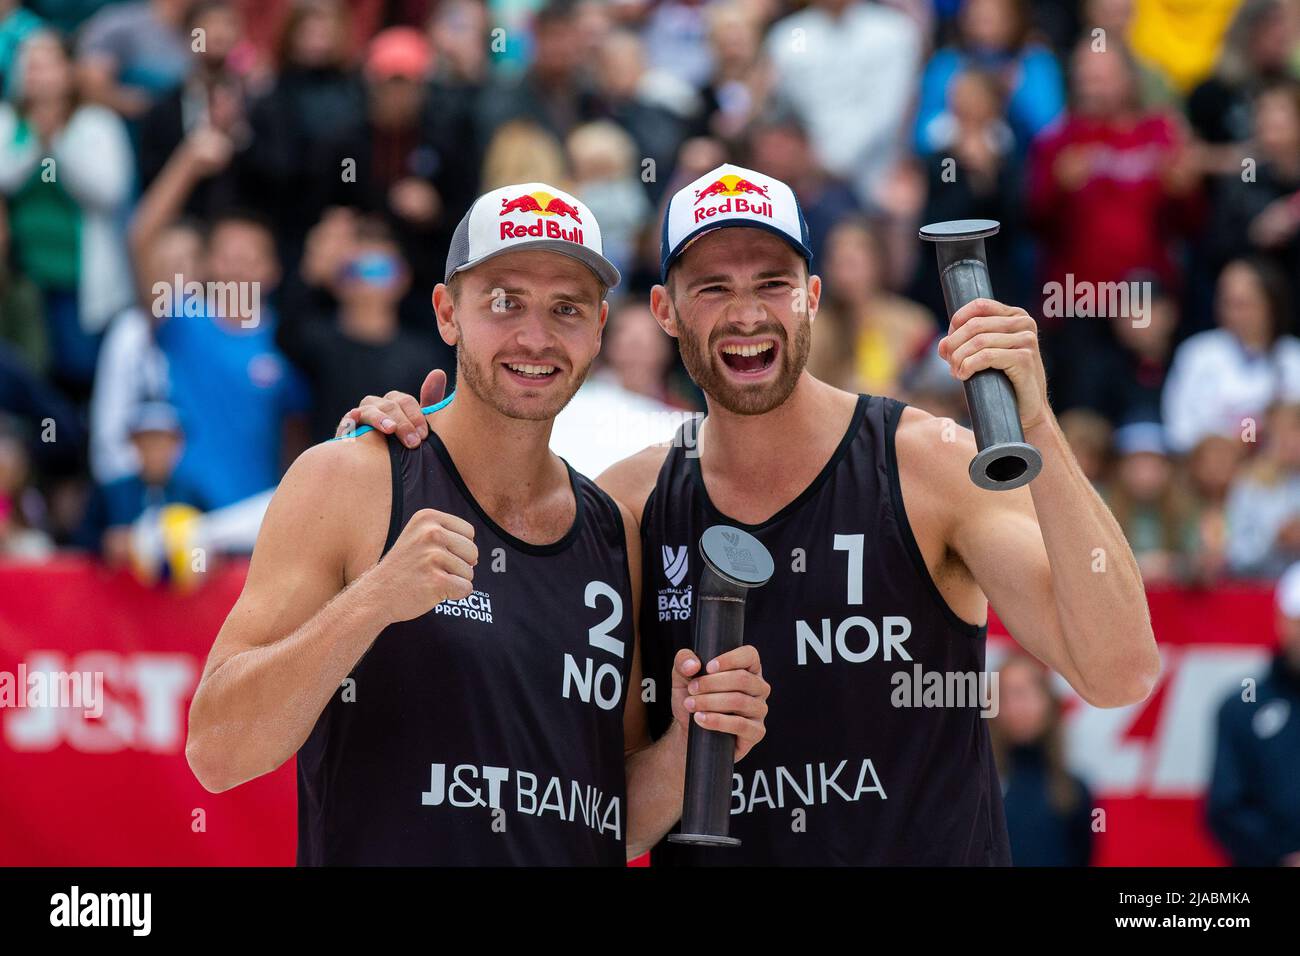 Ostrava, Czech Republic. 29th May, 2022. Christian Sandlie Sorum, Anders Berntsen Mol of Norway with trophy after the Pro Tour beach volleyball tournament of Elite category match in Ostrava, Czech Republic, May 29, 2022. Credit: Vladimir Prycek/CTK Photo/Alamy Live News Stock Photo